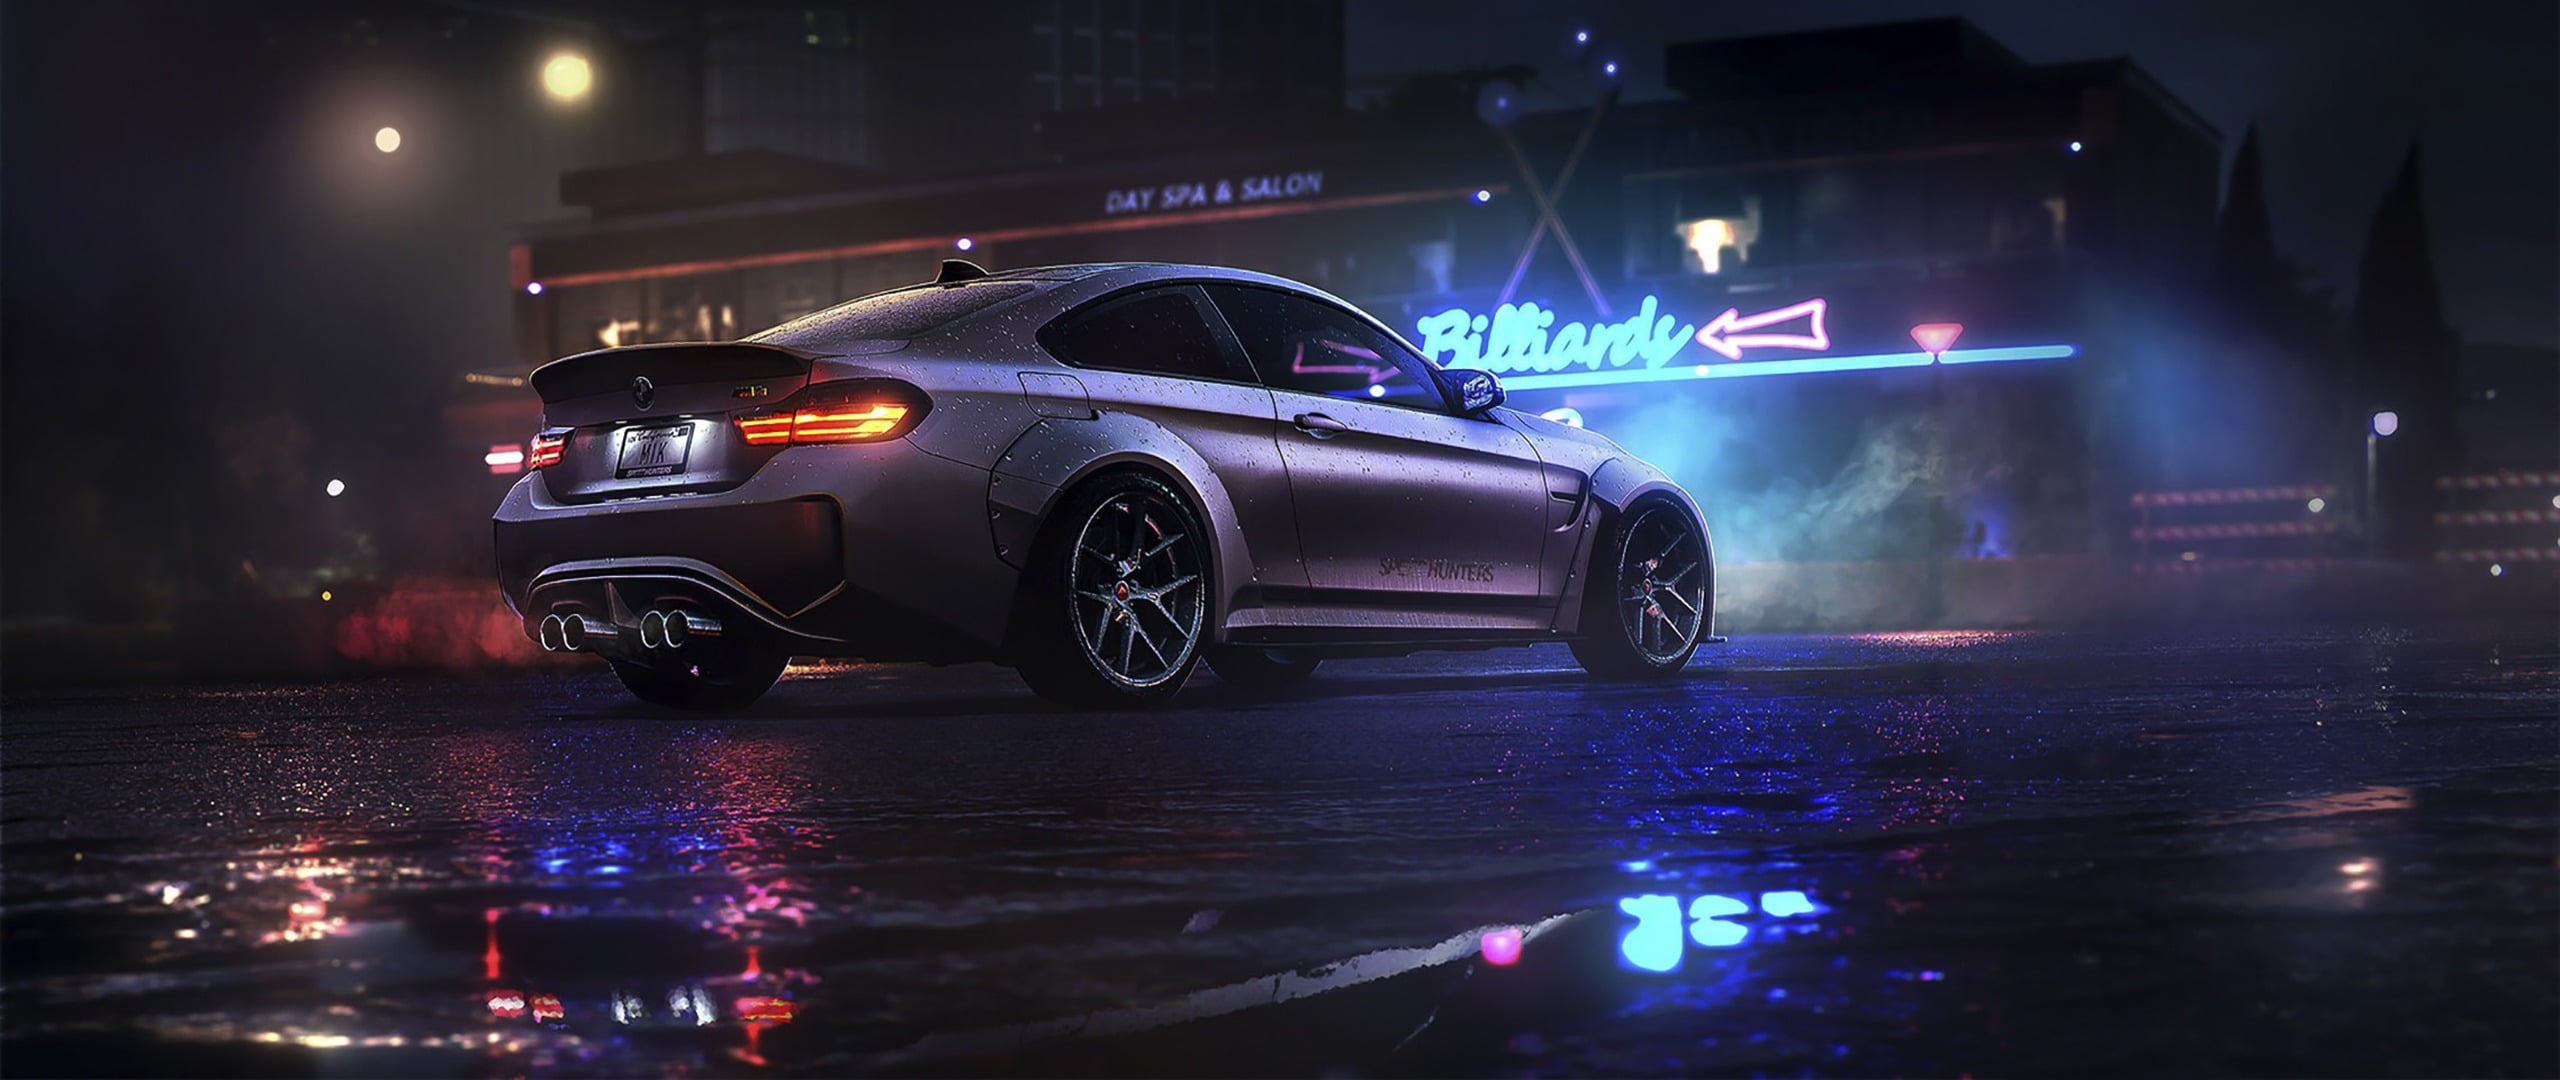 Wallpaper Silver BMW coupe animation, ultra-wide, car, Need for Speed, mode of transportation